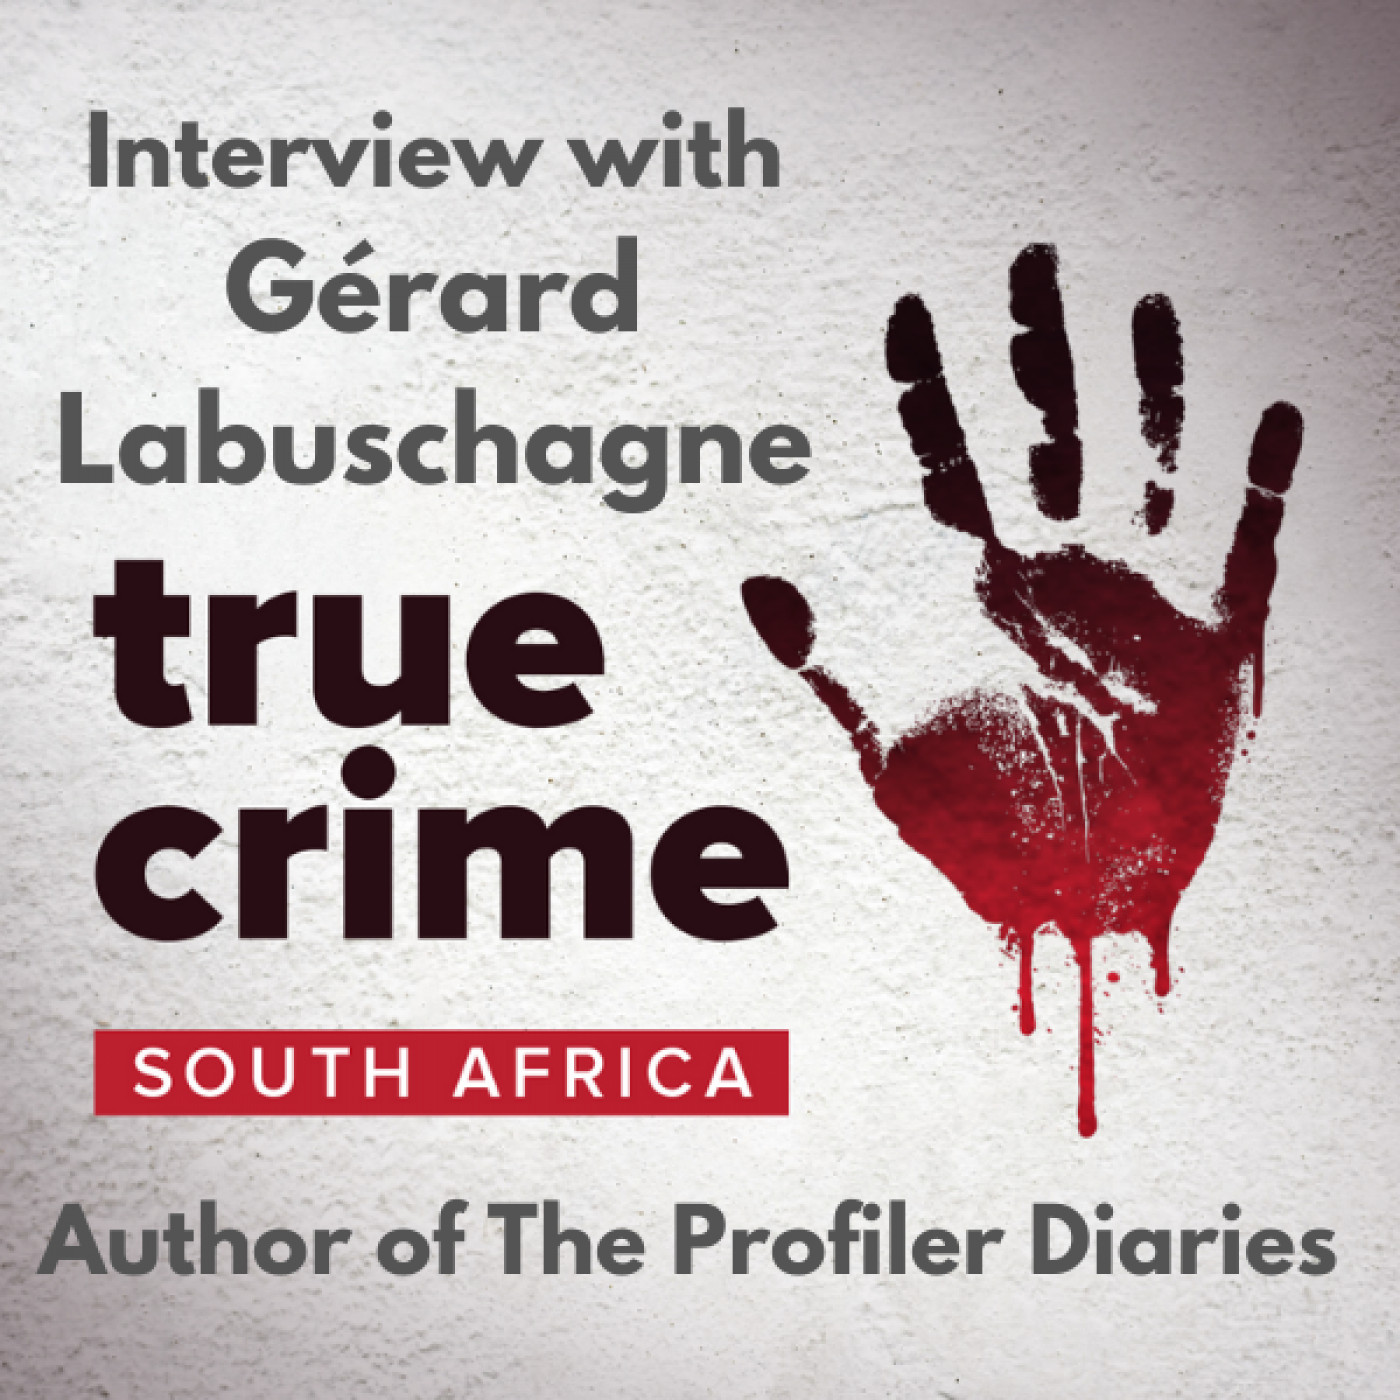 Interview with Gerard Labuschagne: Author of The Profiler Diaries